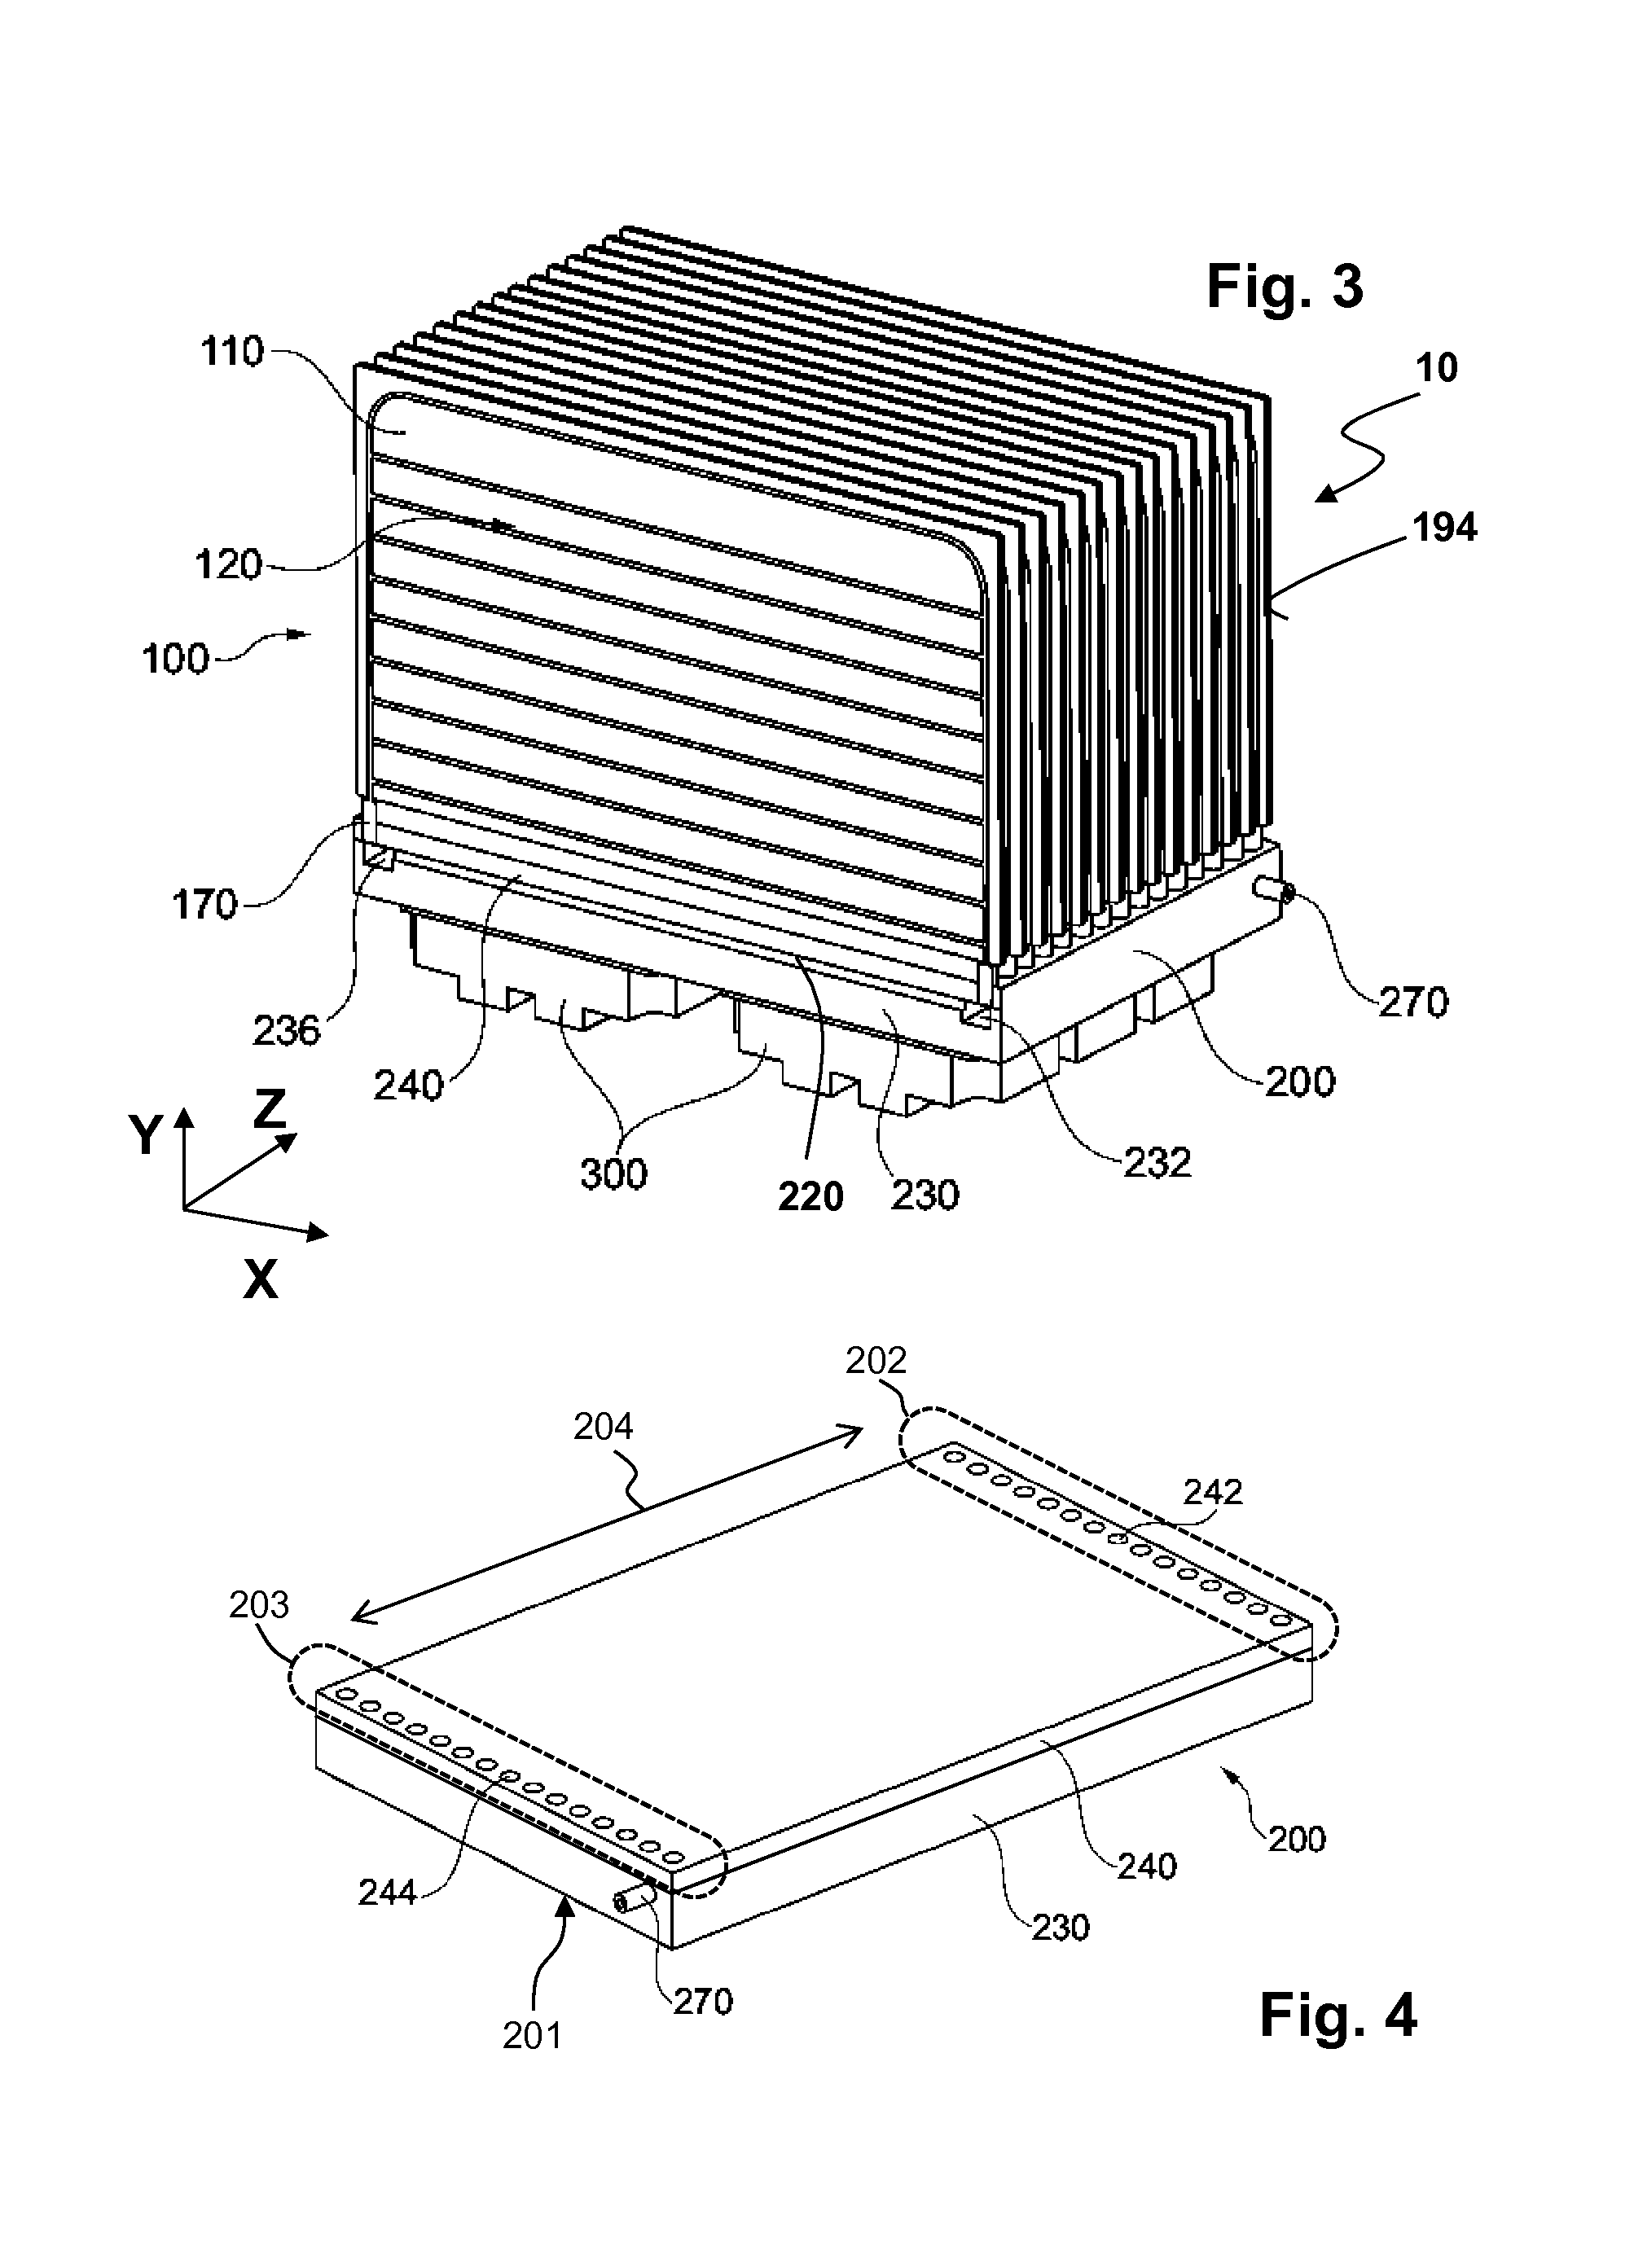 Two-phase cooling system for electronic components